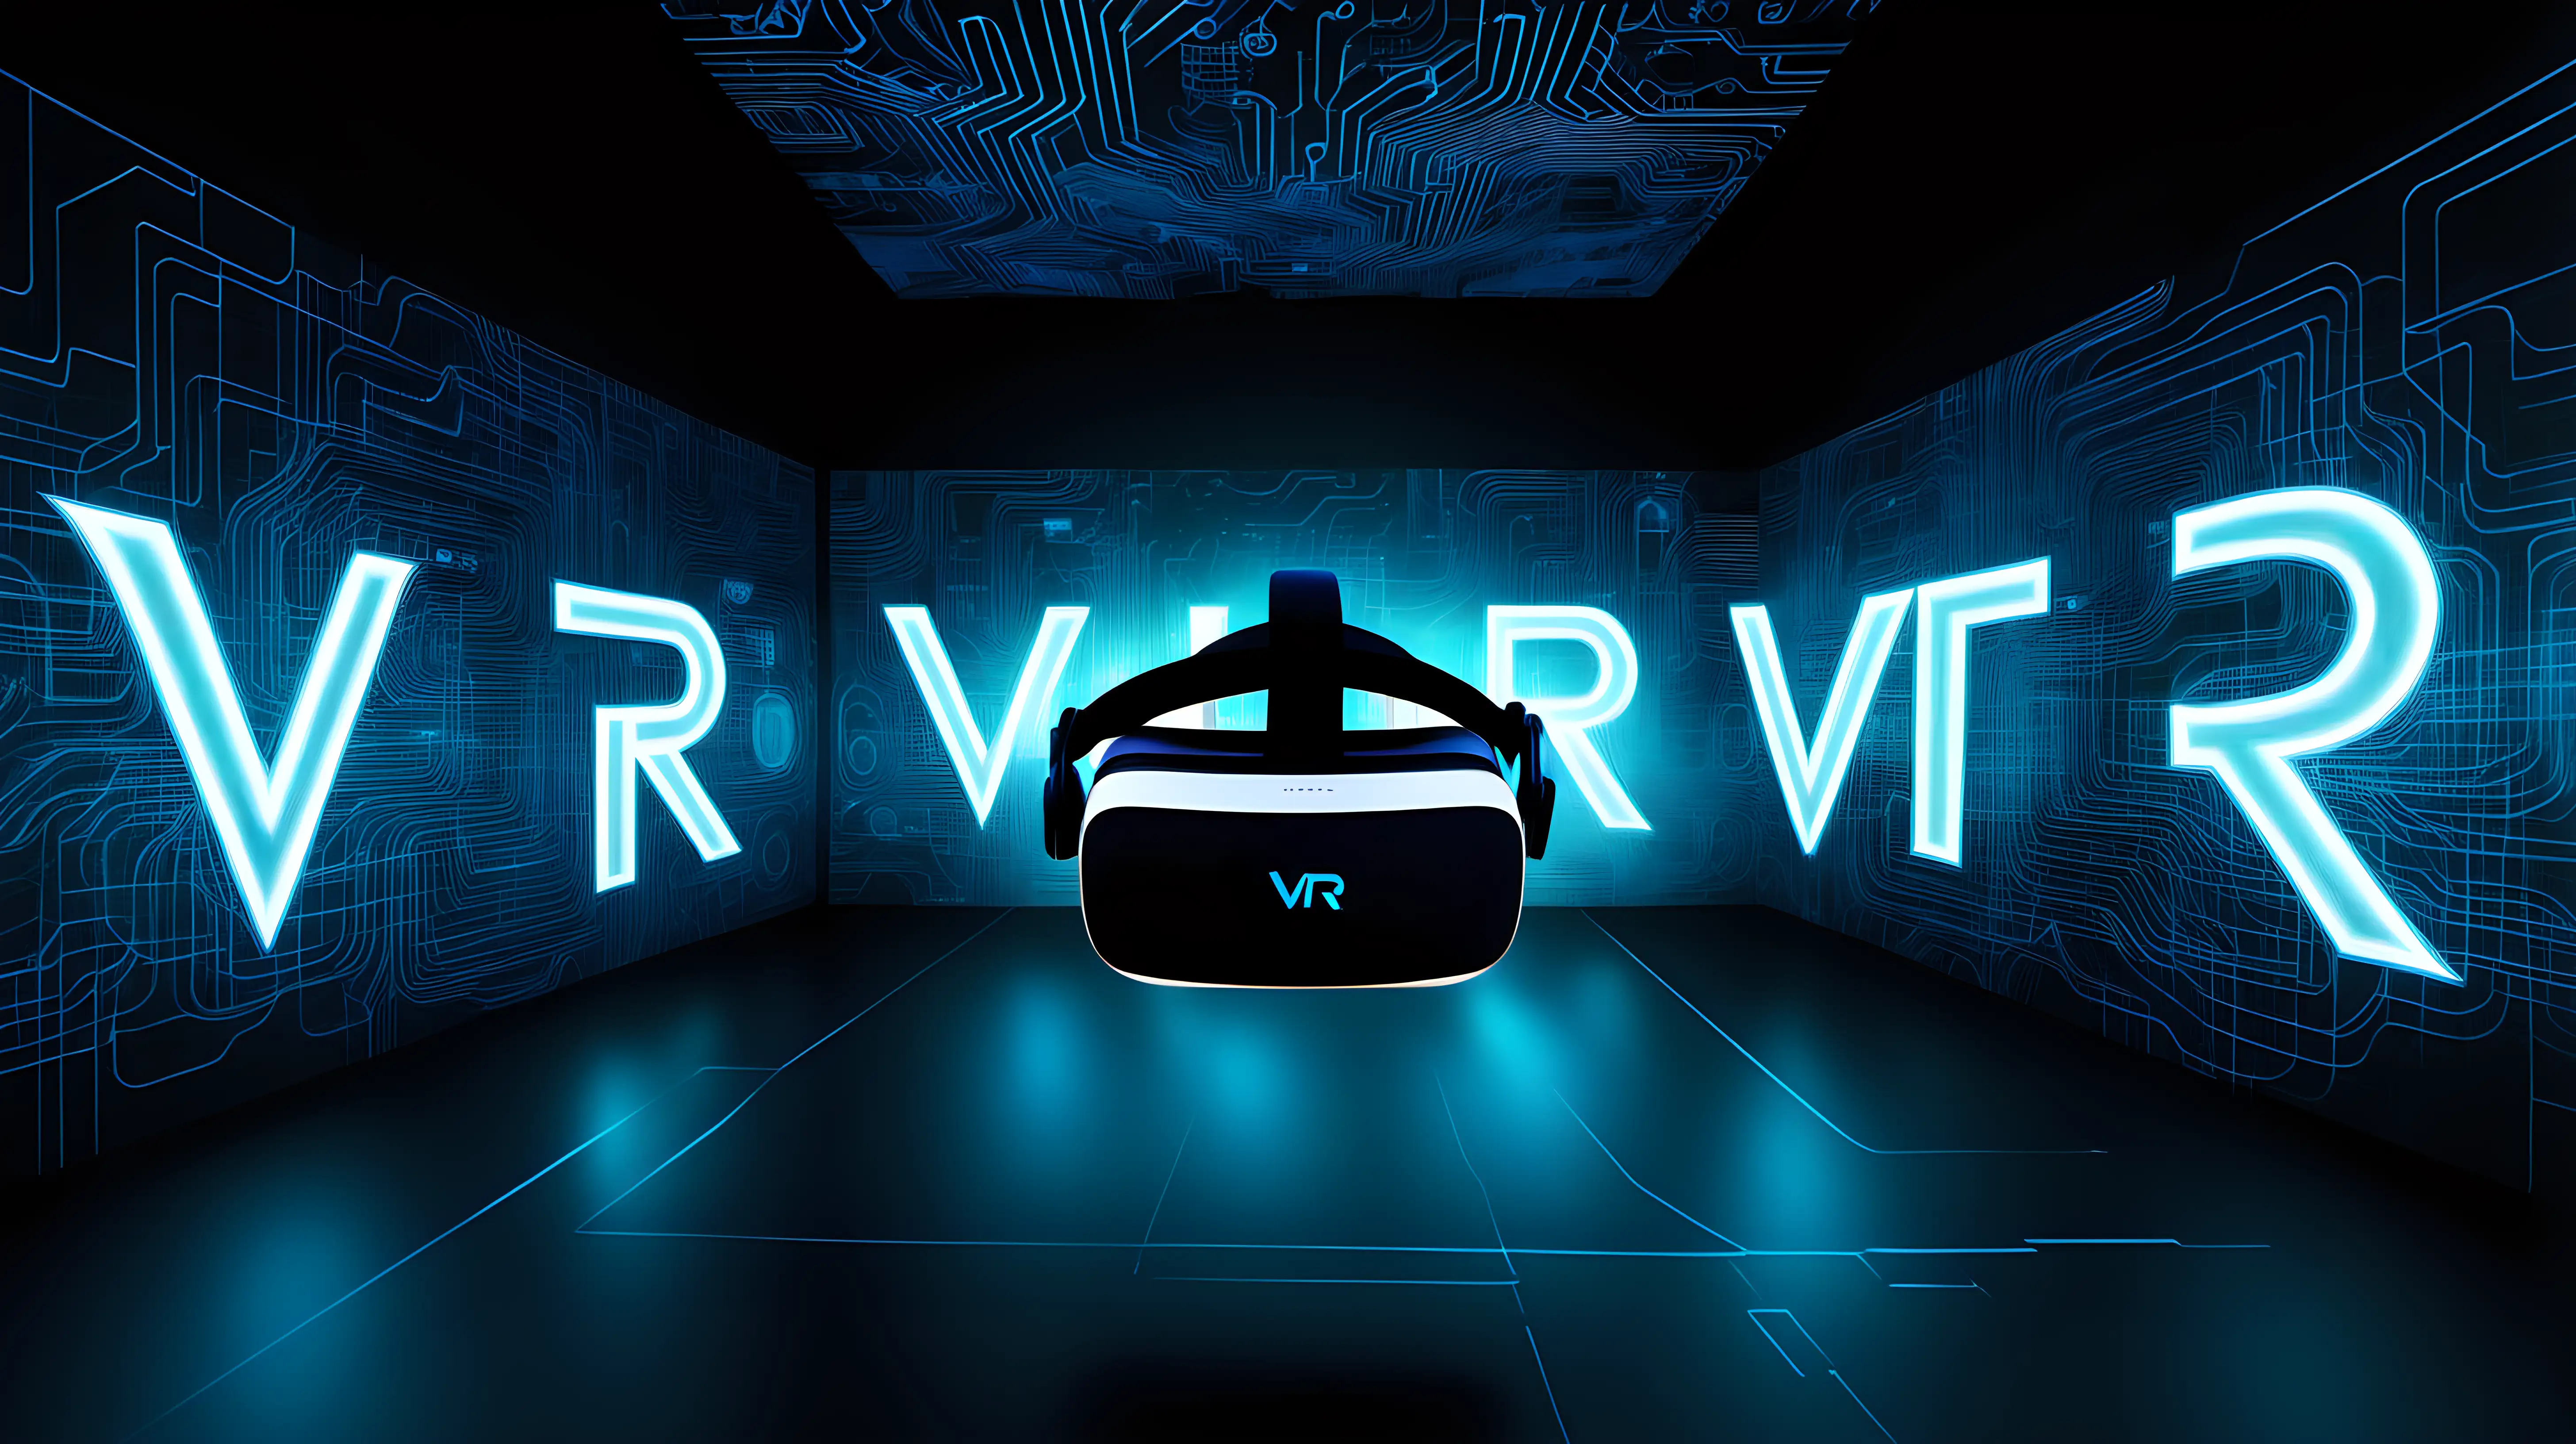 "VR" displayed in glowing, circuit-like patterns against a dark, dystopian backdrop, illustrating the technological advancements and complexities of virtual reality.